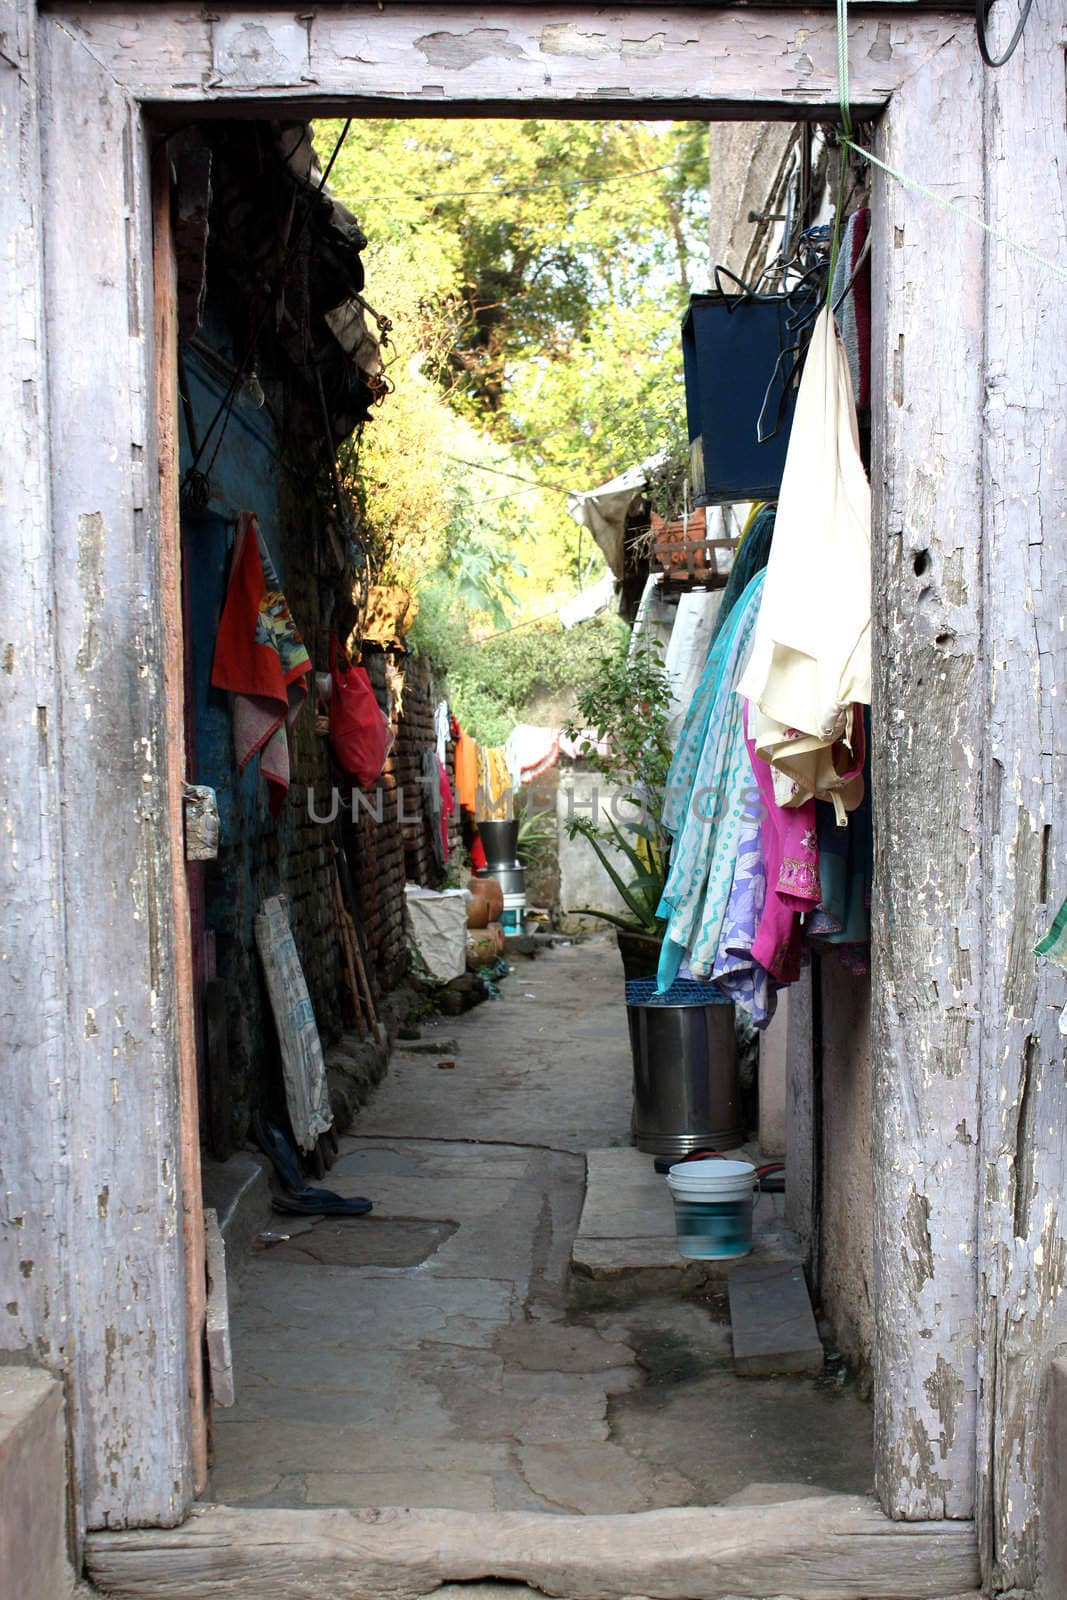 A small alley in the Indian ghetto.